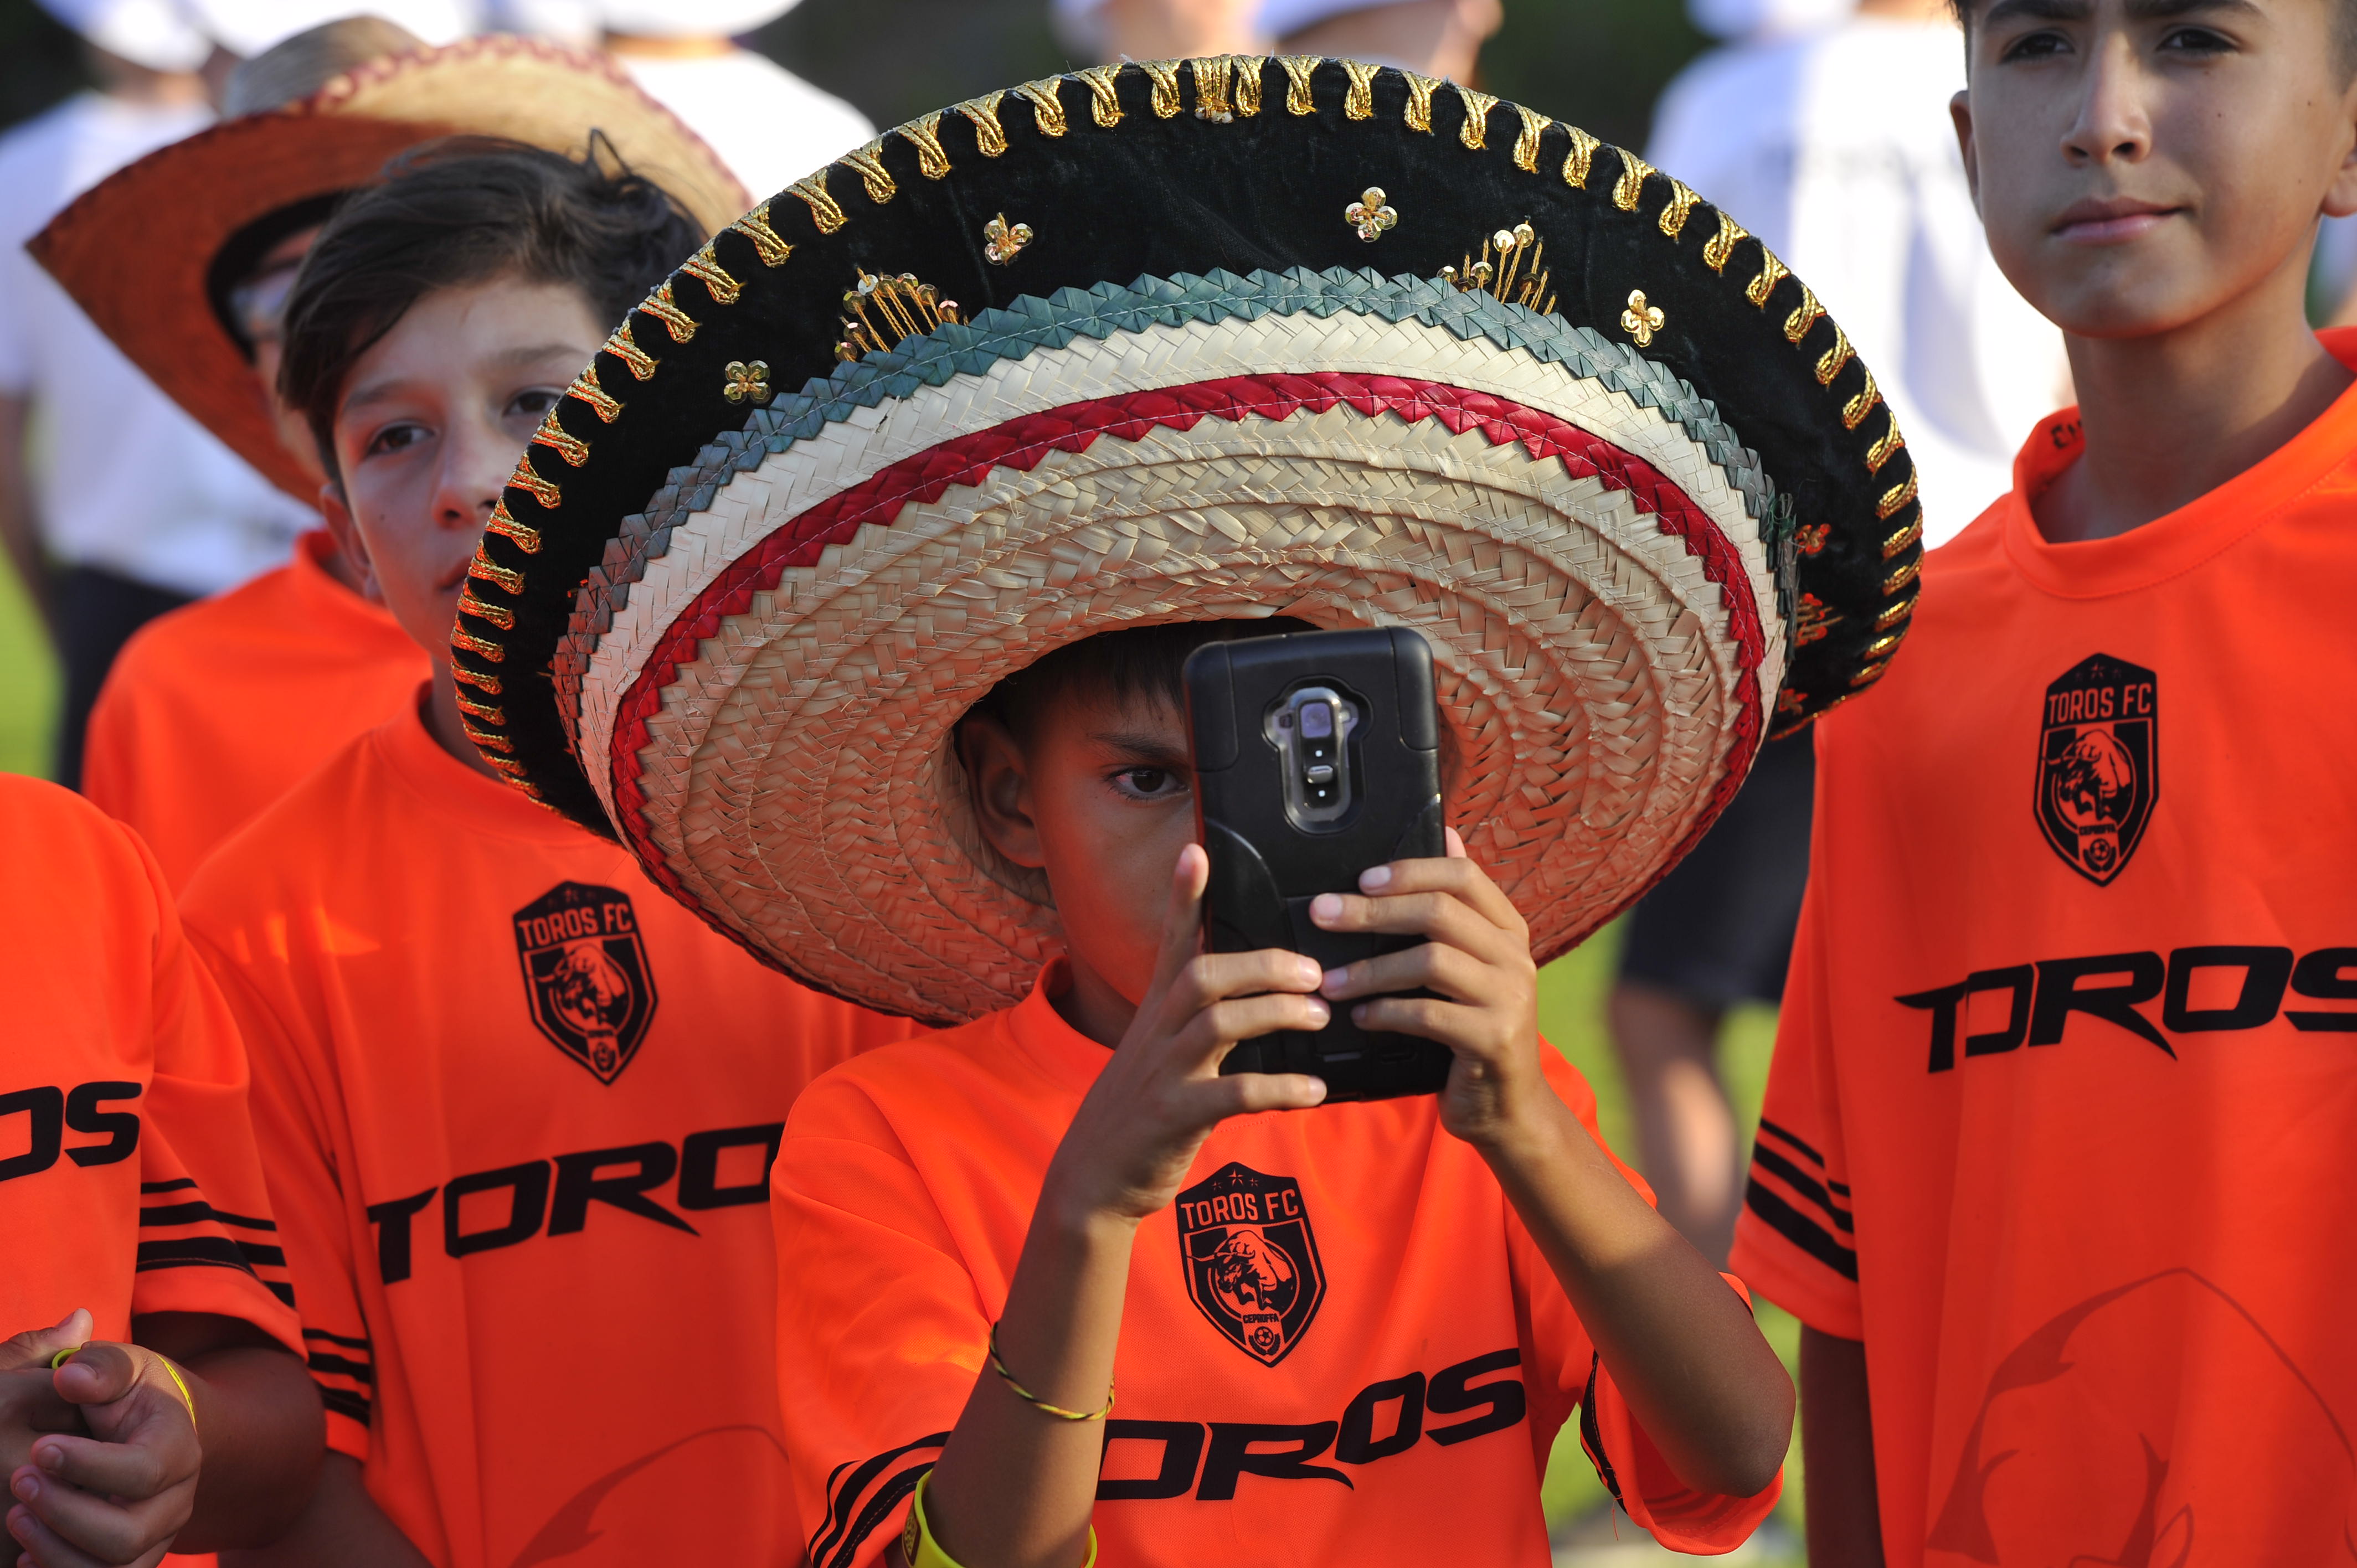 IberCup Estoril - small player with a big hat - Road to Sport